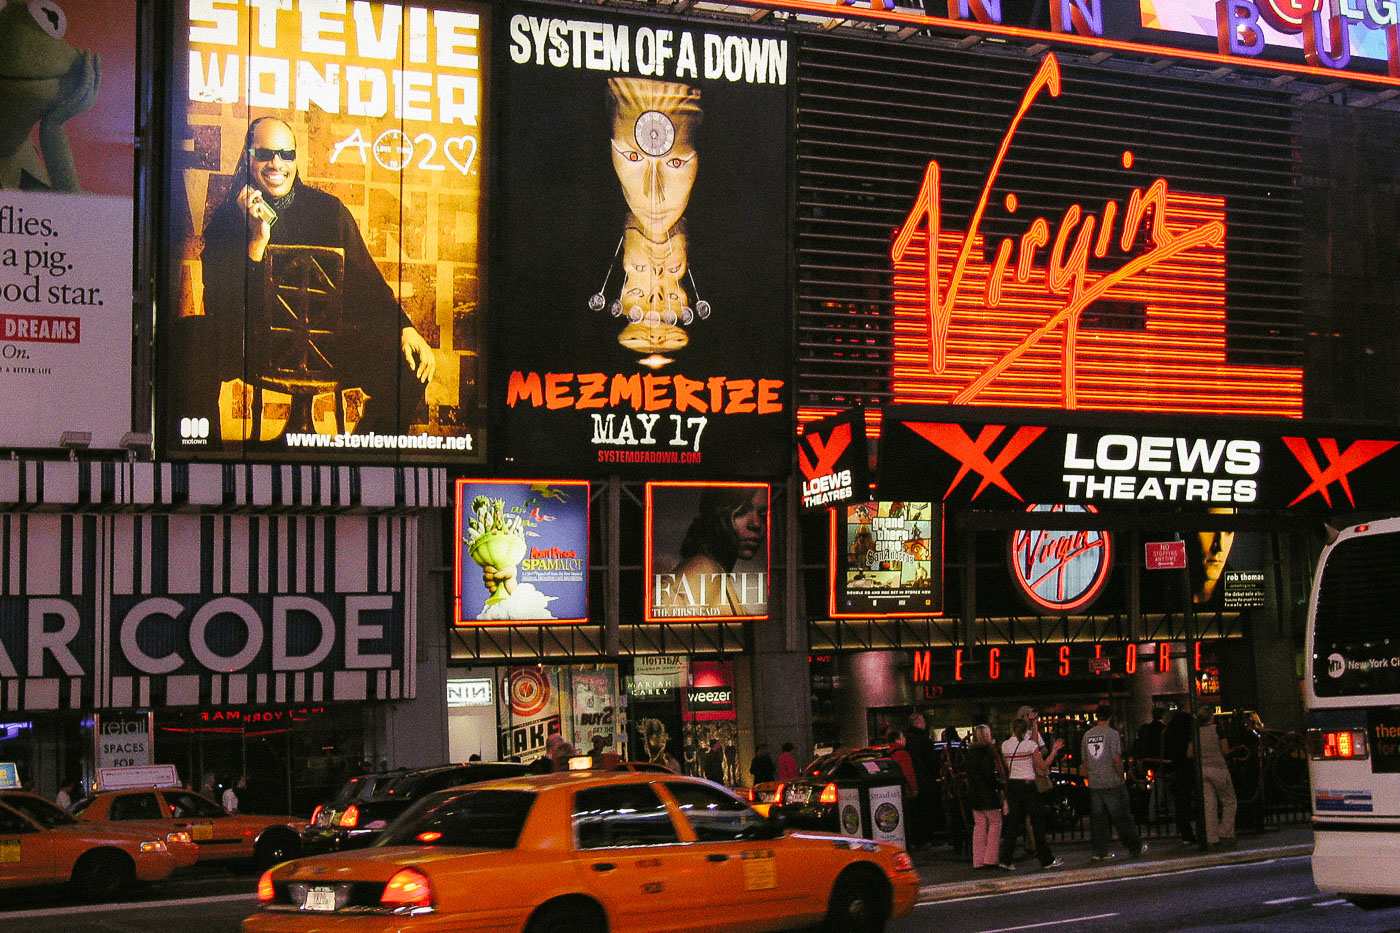 Taxis drive by the Virgin Megastore in Times Square